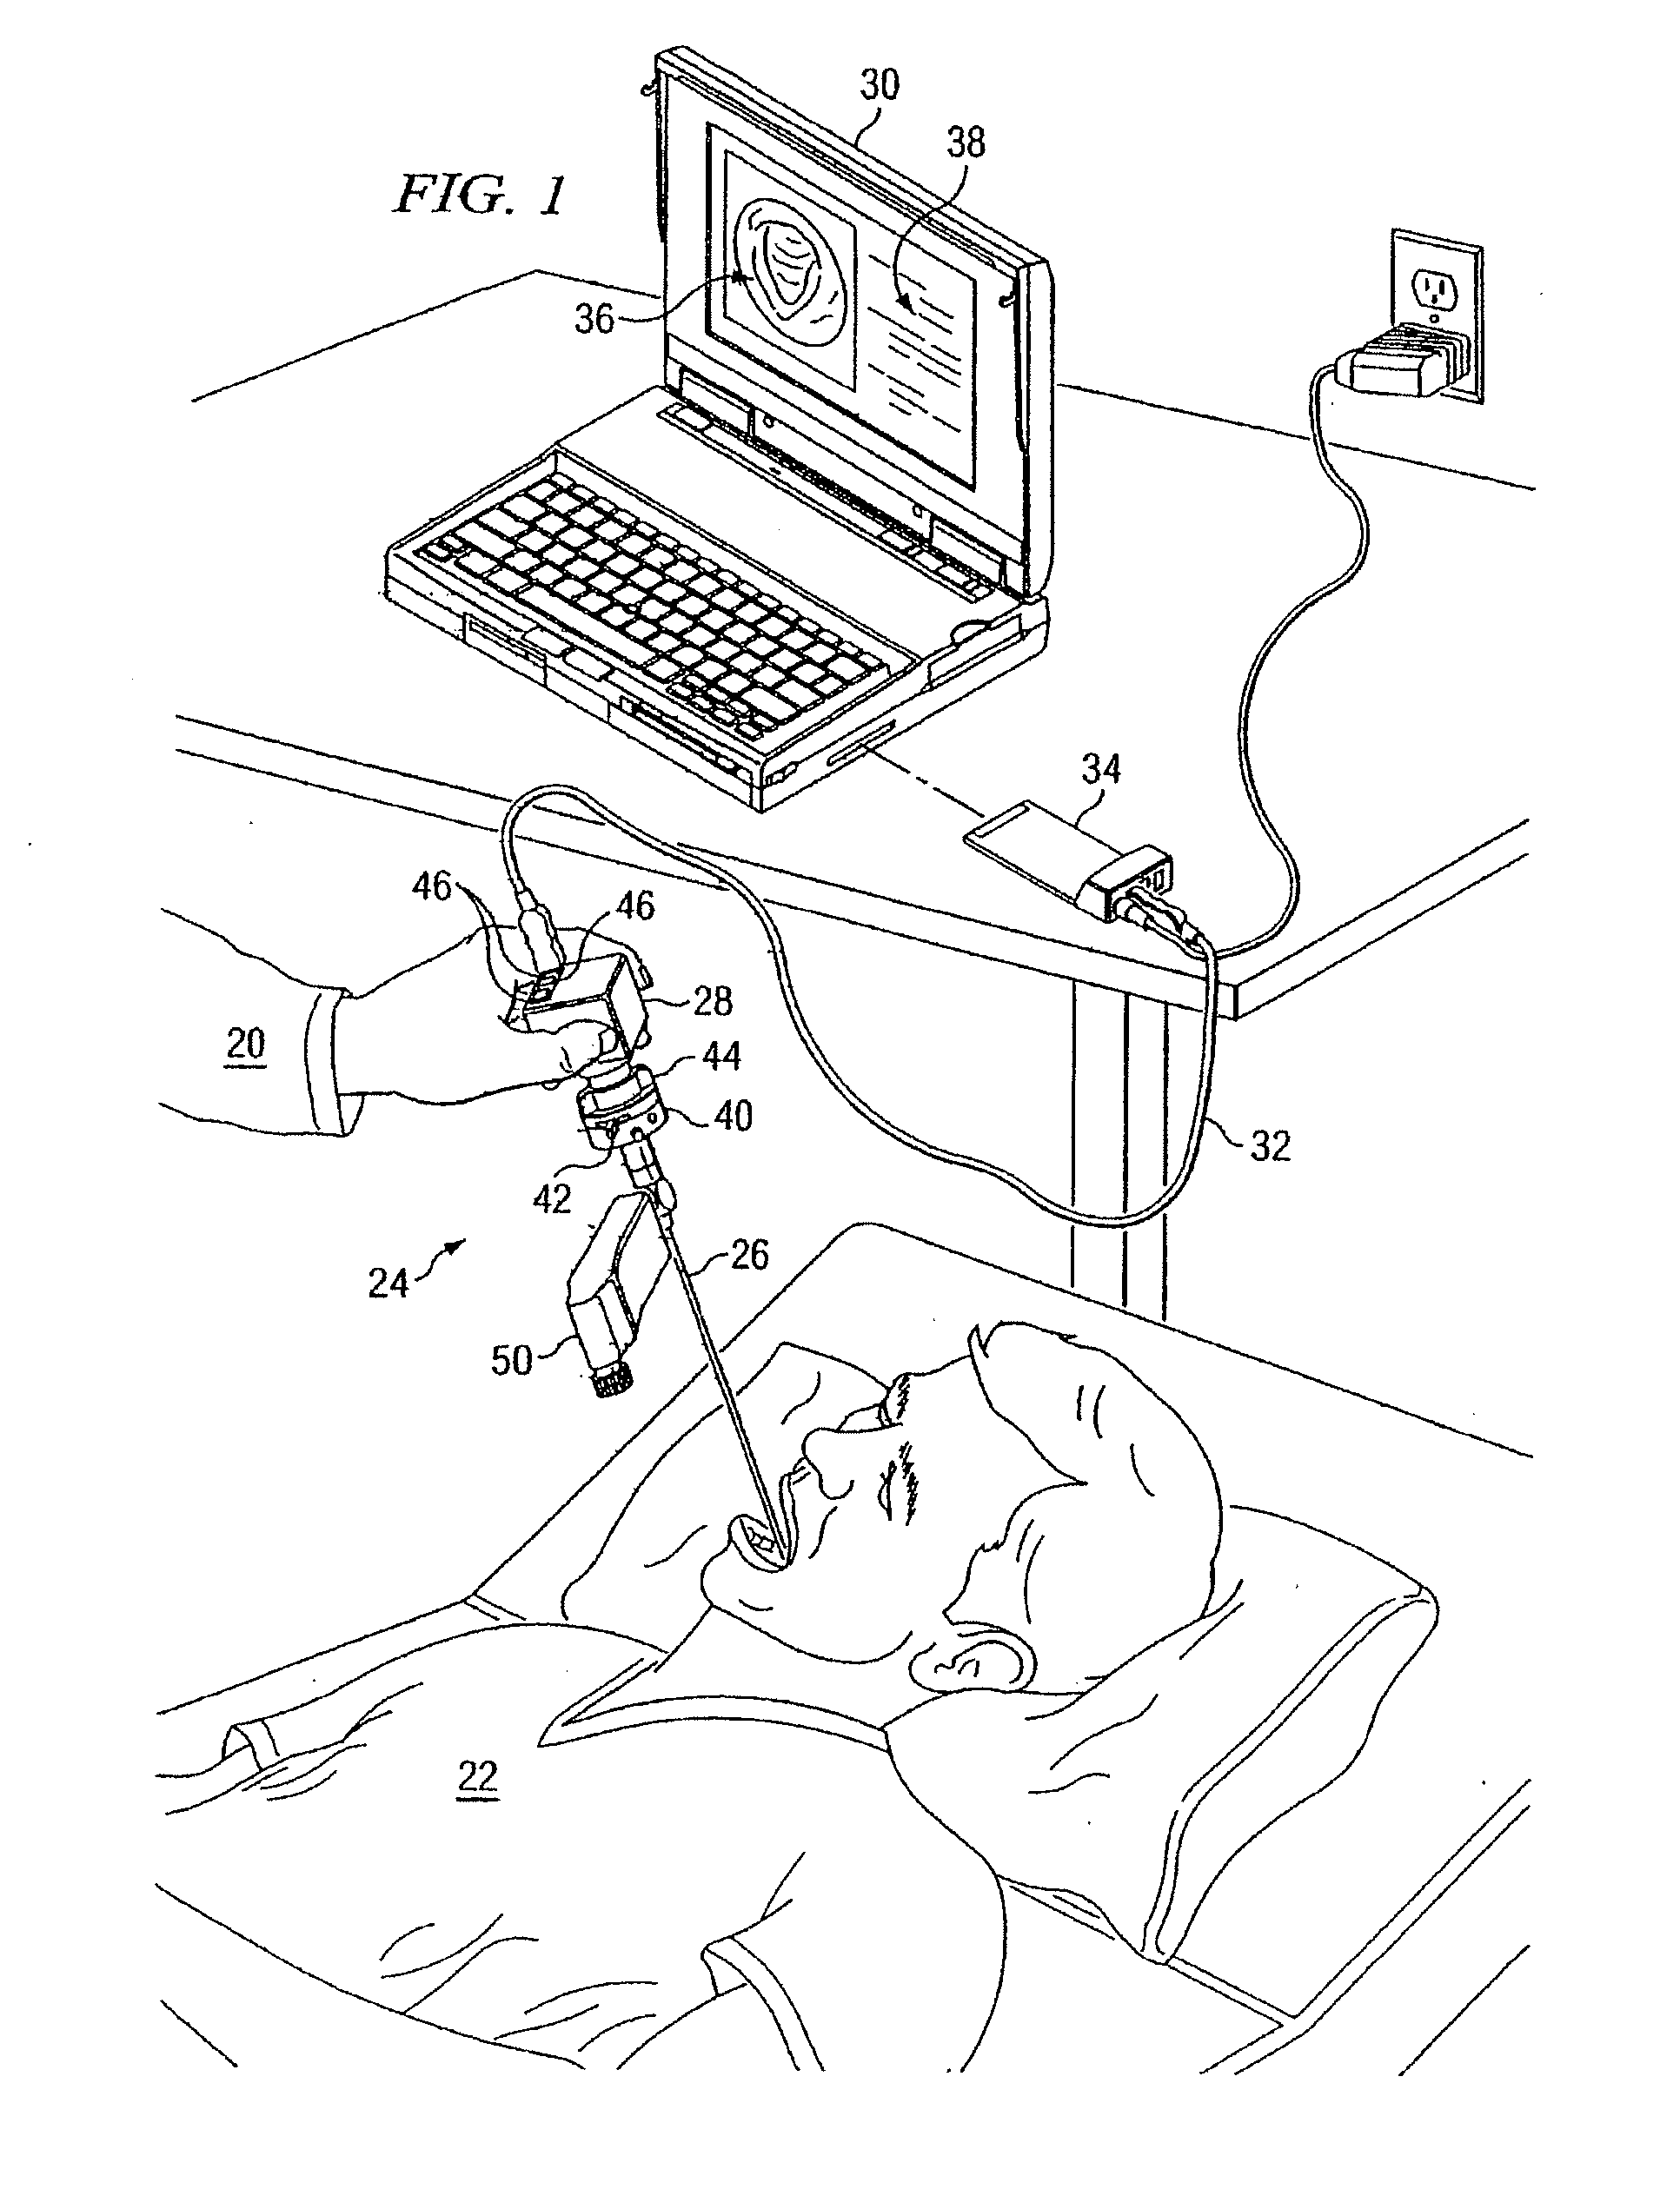 Endoscopic digital recording system with removable screen and storage device